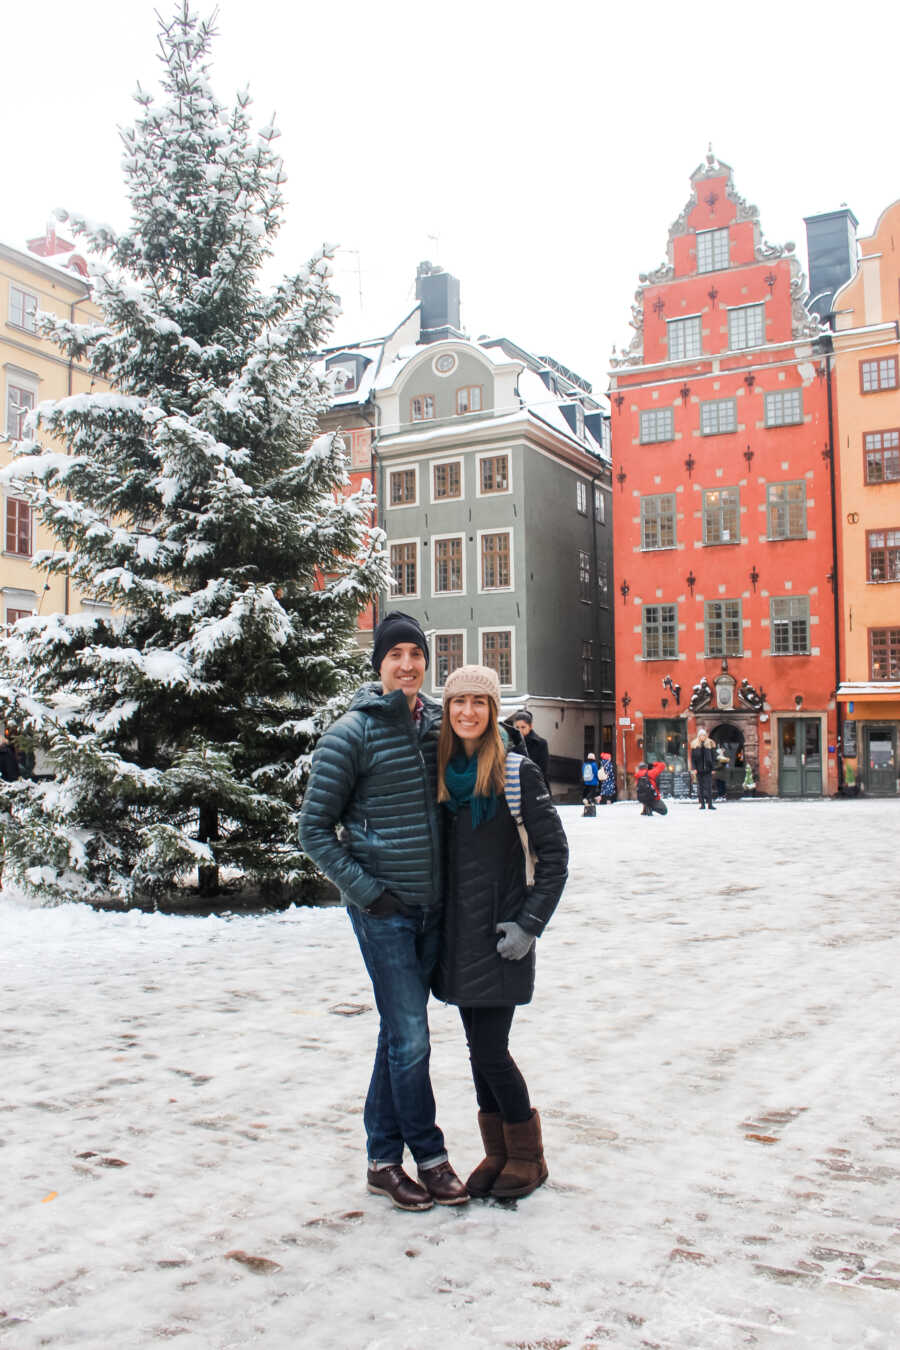 Young couple take winter picture standing outside in the snow on one of their many adventures together.